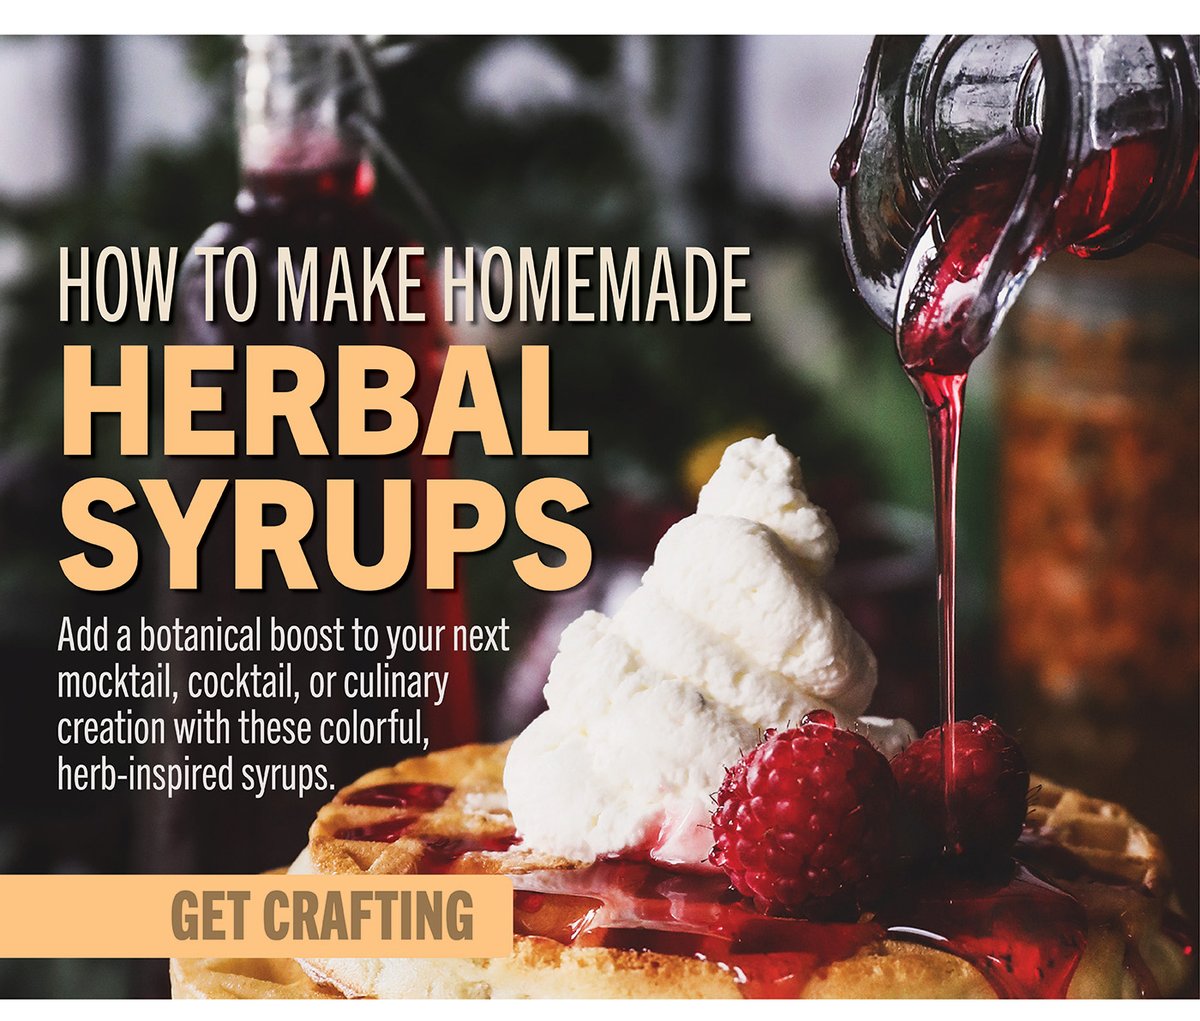 How to Make Homemade Herbal Syrups